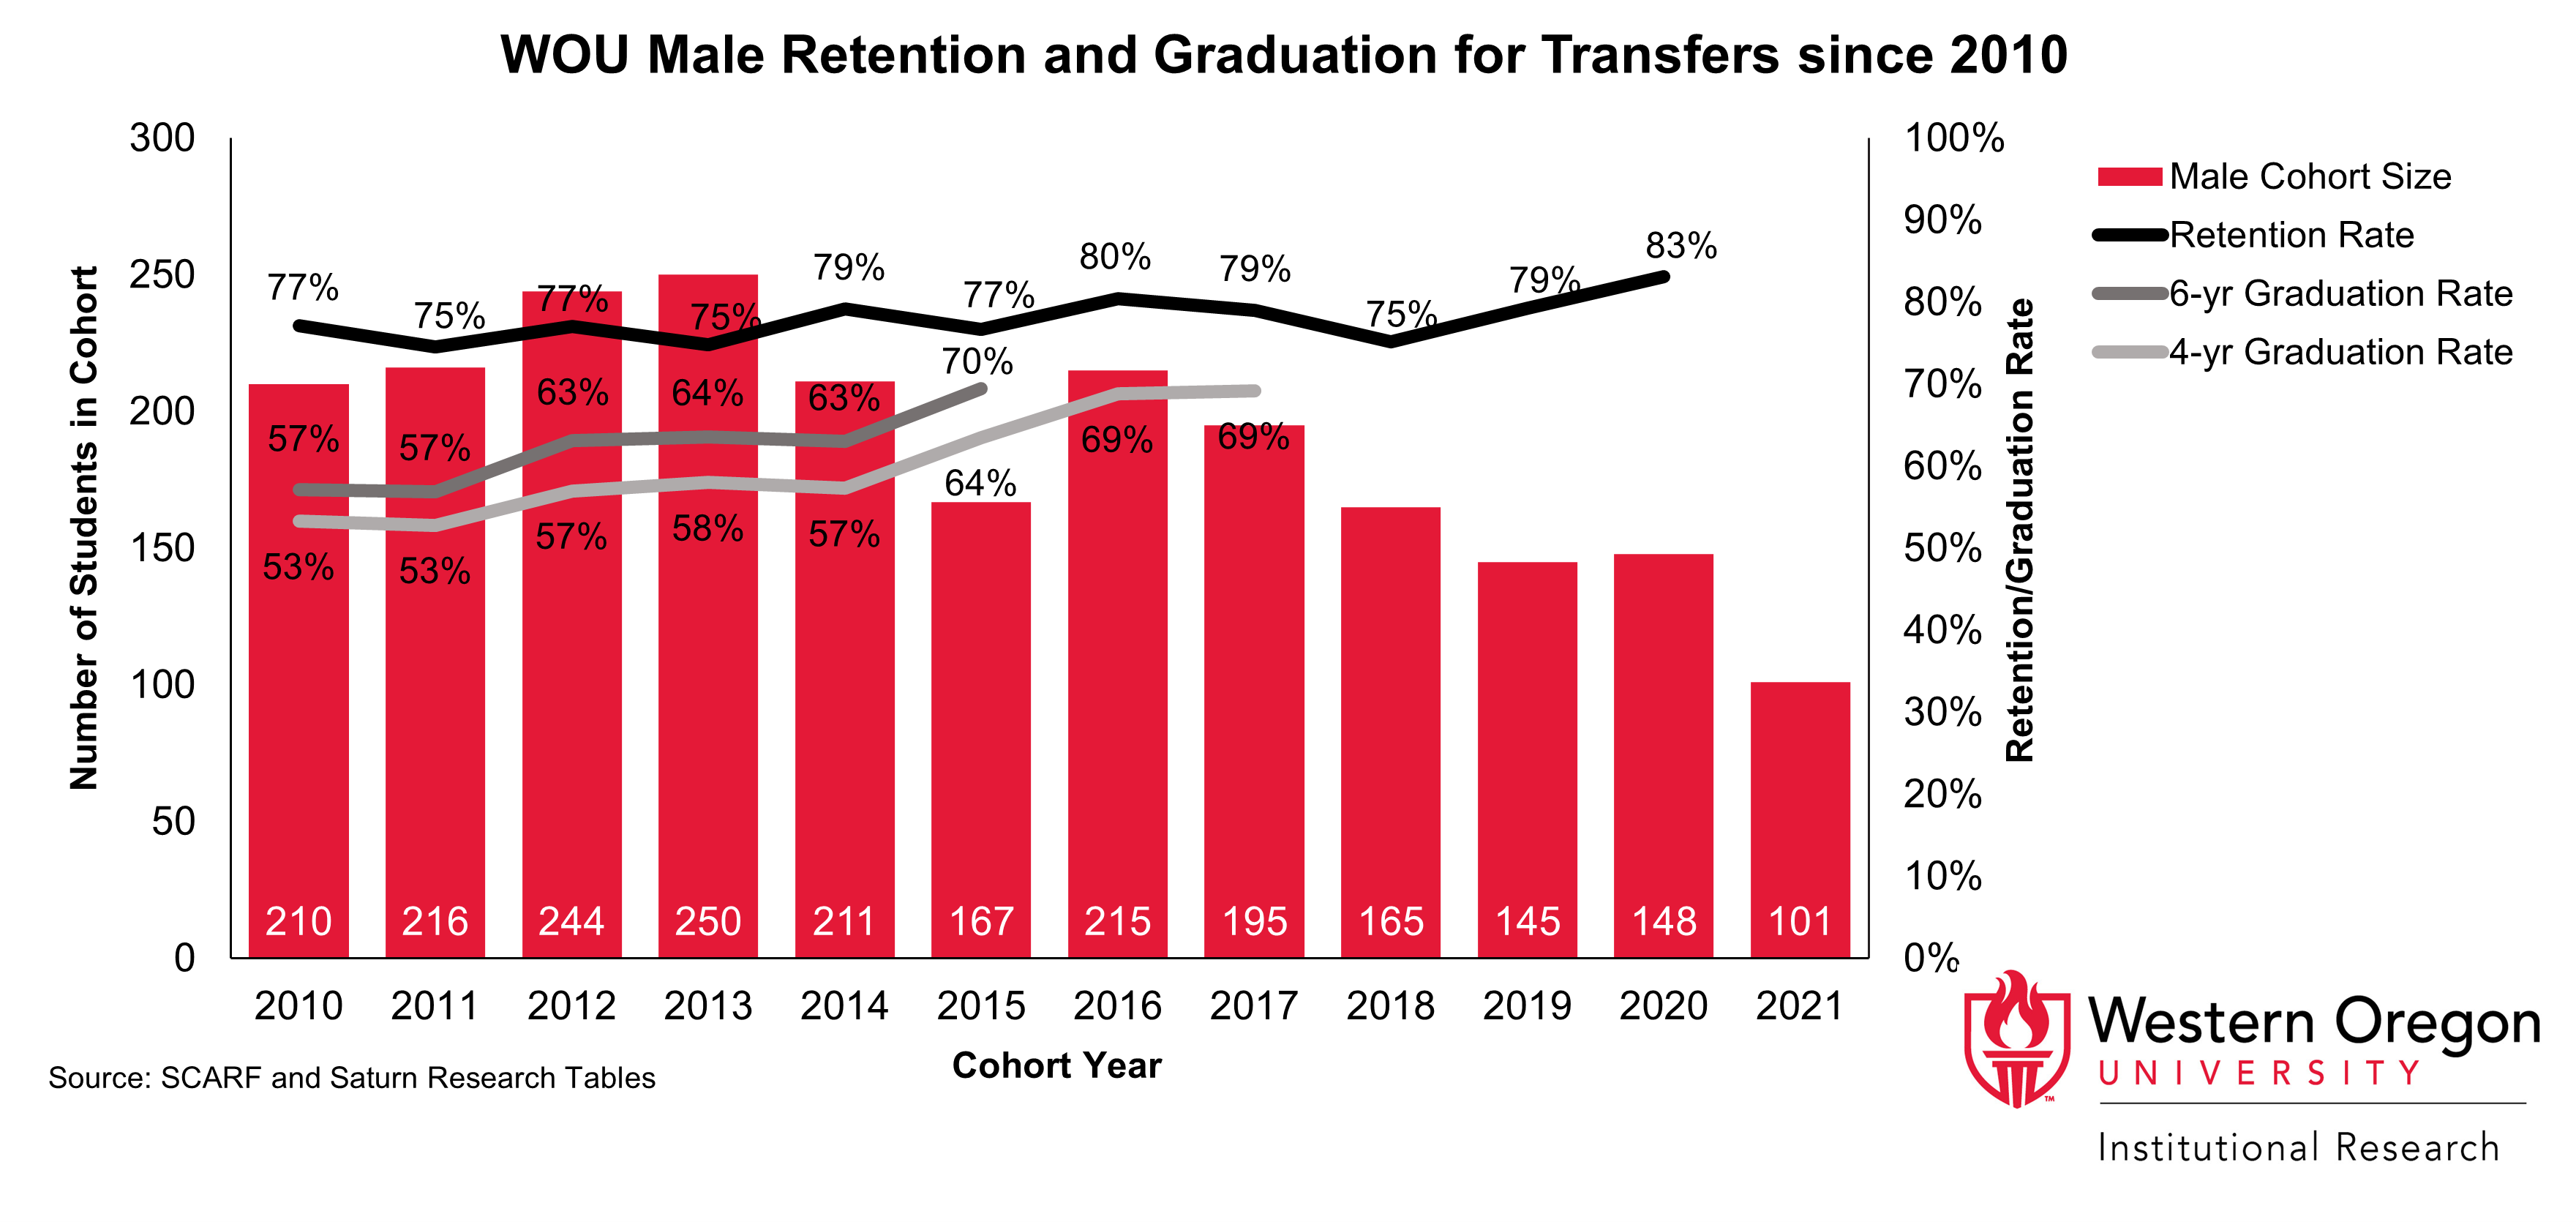 Bar and line graph of retention and 4- and 6-year graduation rates since 2010 for WOU transfer students that are male, showing that graduation rates have been steadily increasing while retention rates have remained largely stable